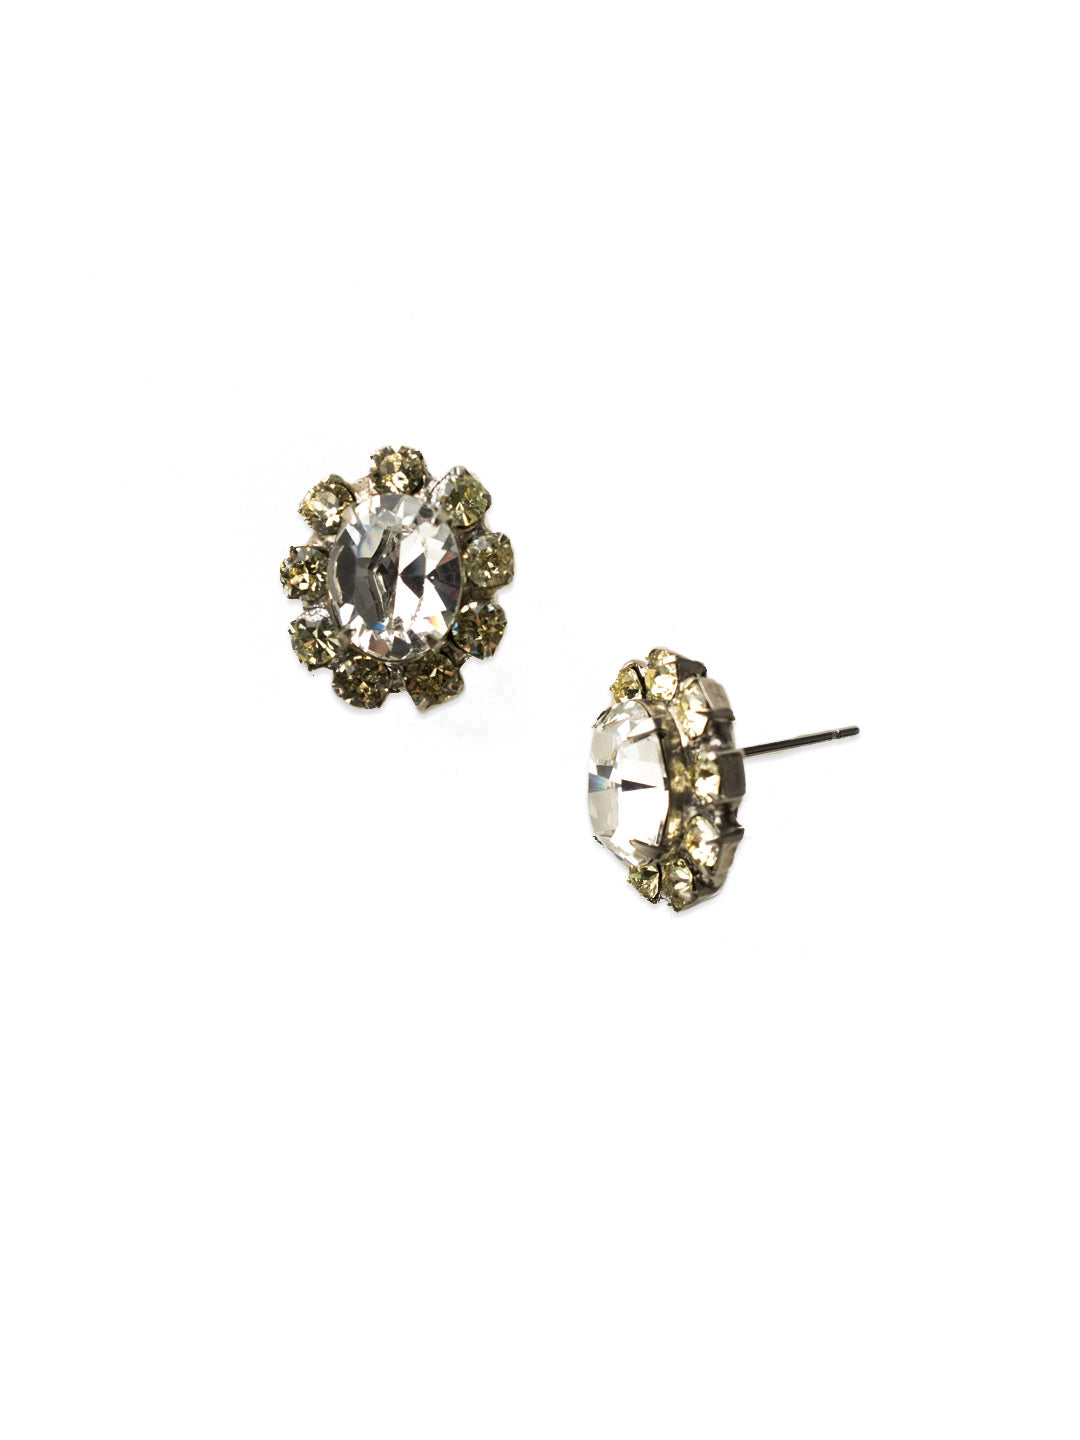 On The Border Earring - ECP22ASLZ - <p>These tiny trinkets will have your ears sparkling for miles. One oval jewel surrounded by shimmering rhinestones in an antique-inspired setting will give you just the touch of sparkle you were looking for. From Sorrelli's Lemon Zest collection in our Antique Silver-tone finish.</p>